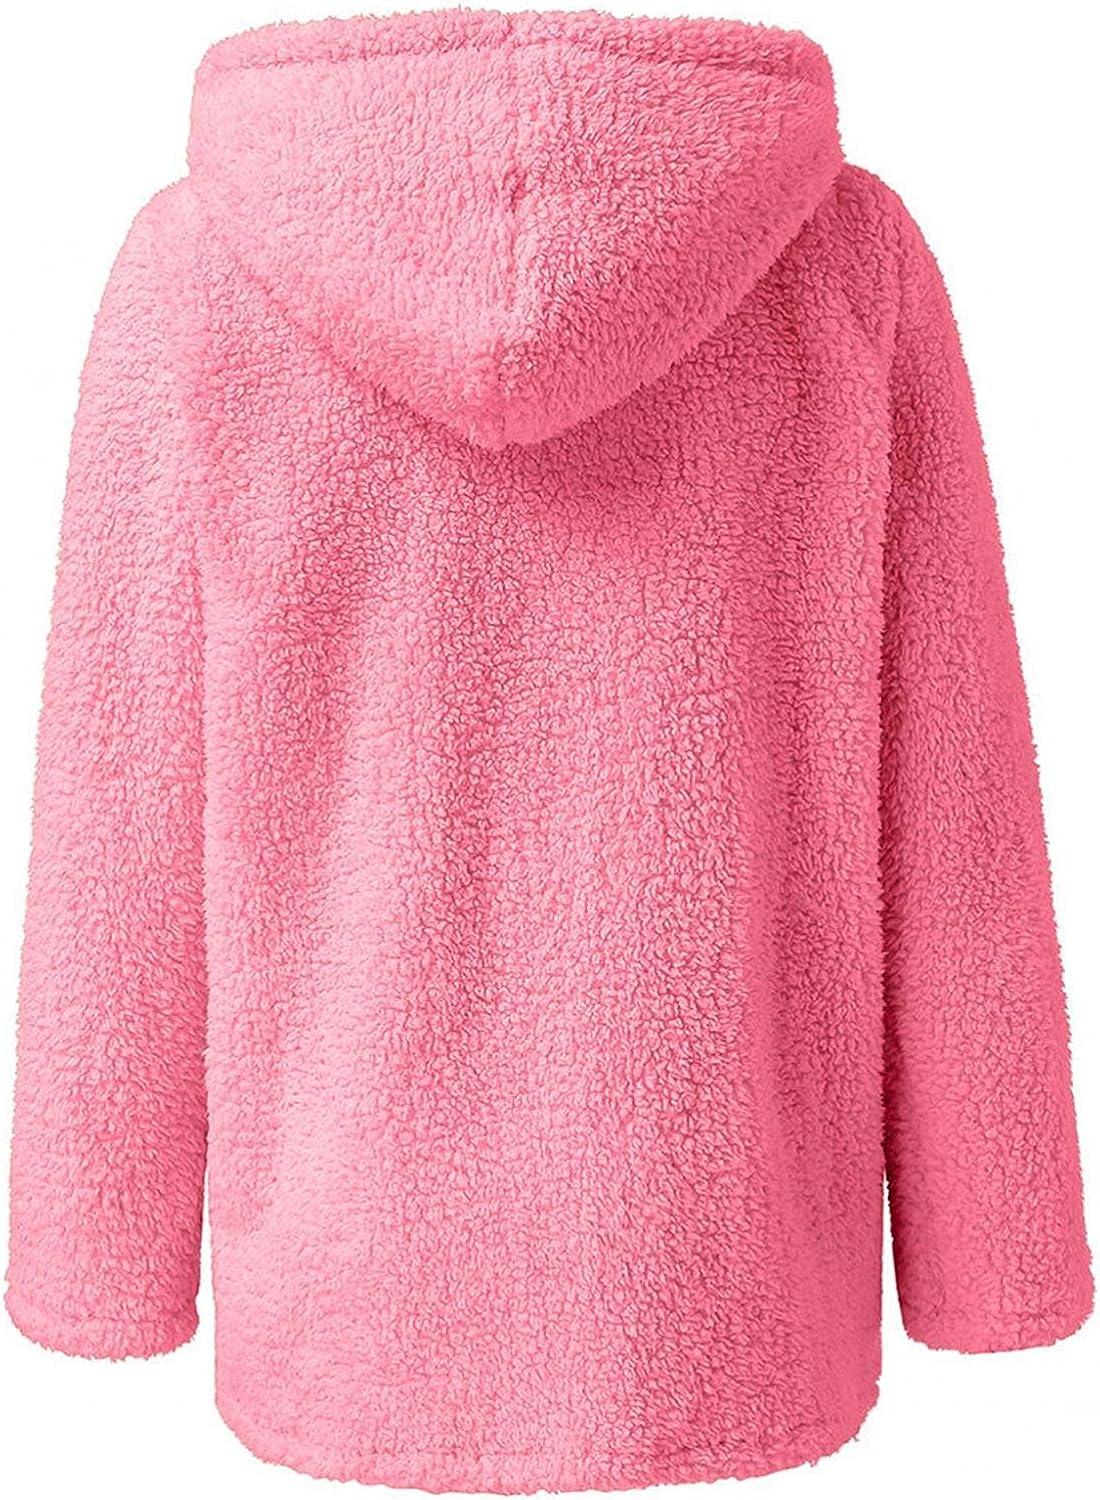 Womens Oversized Sherpa Coat Solid Color Open Front Fuzzy Fleece Hooded  Jacket Casual Trendy Winter Clothes